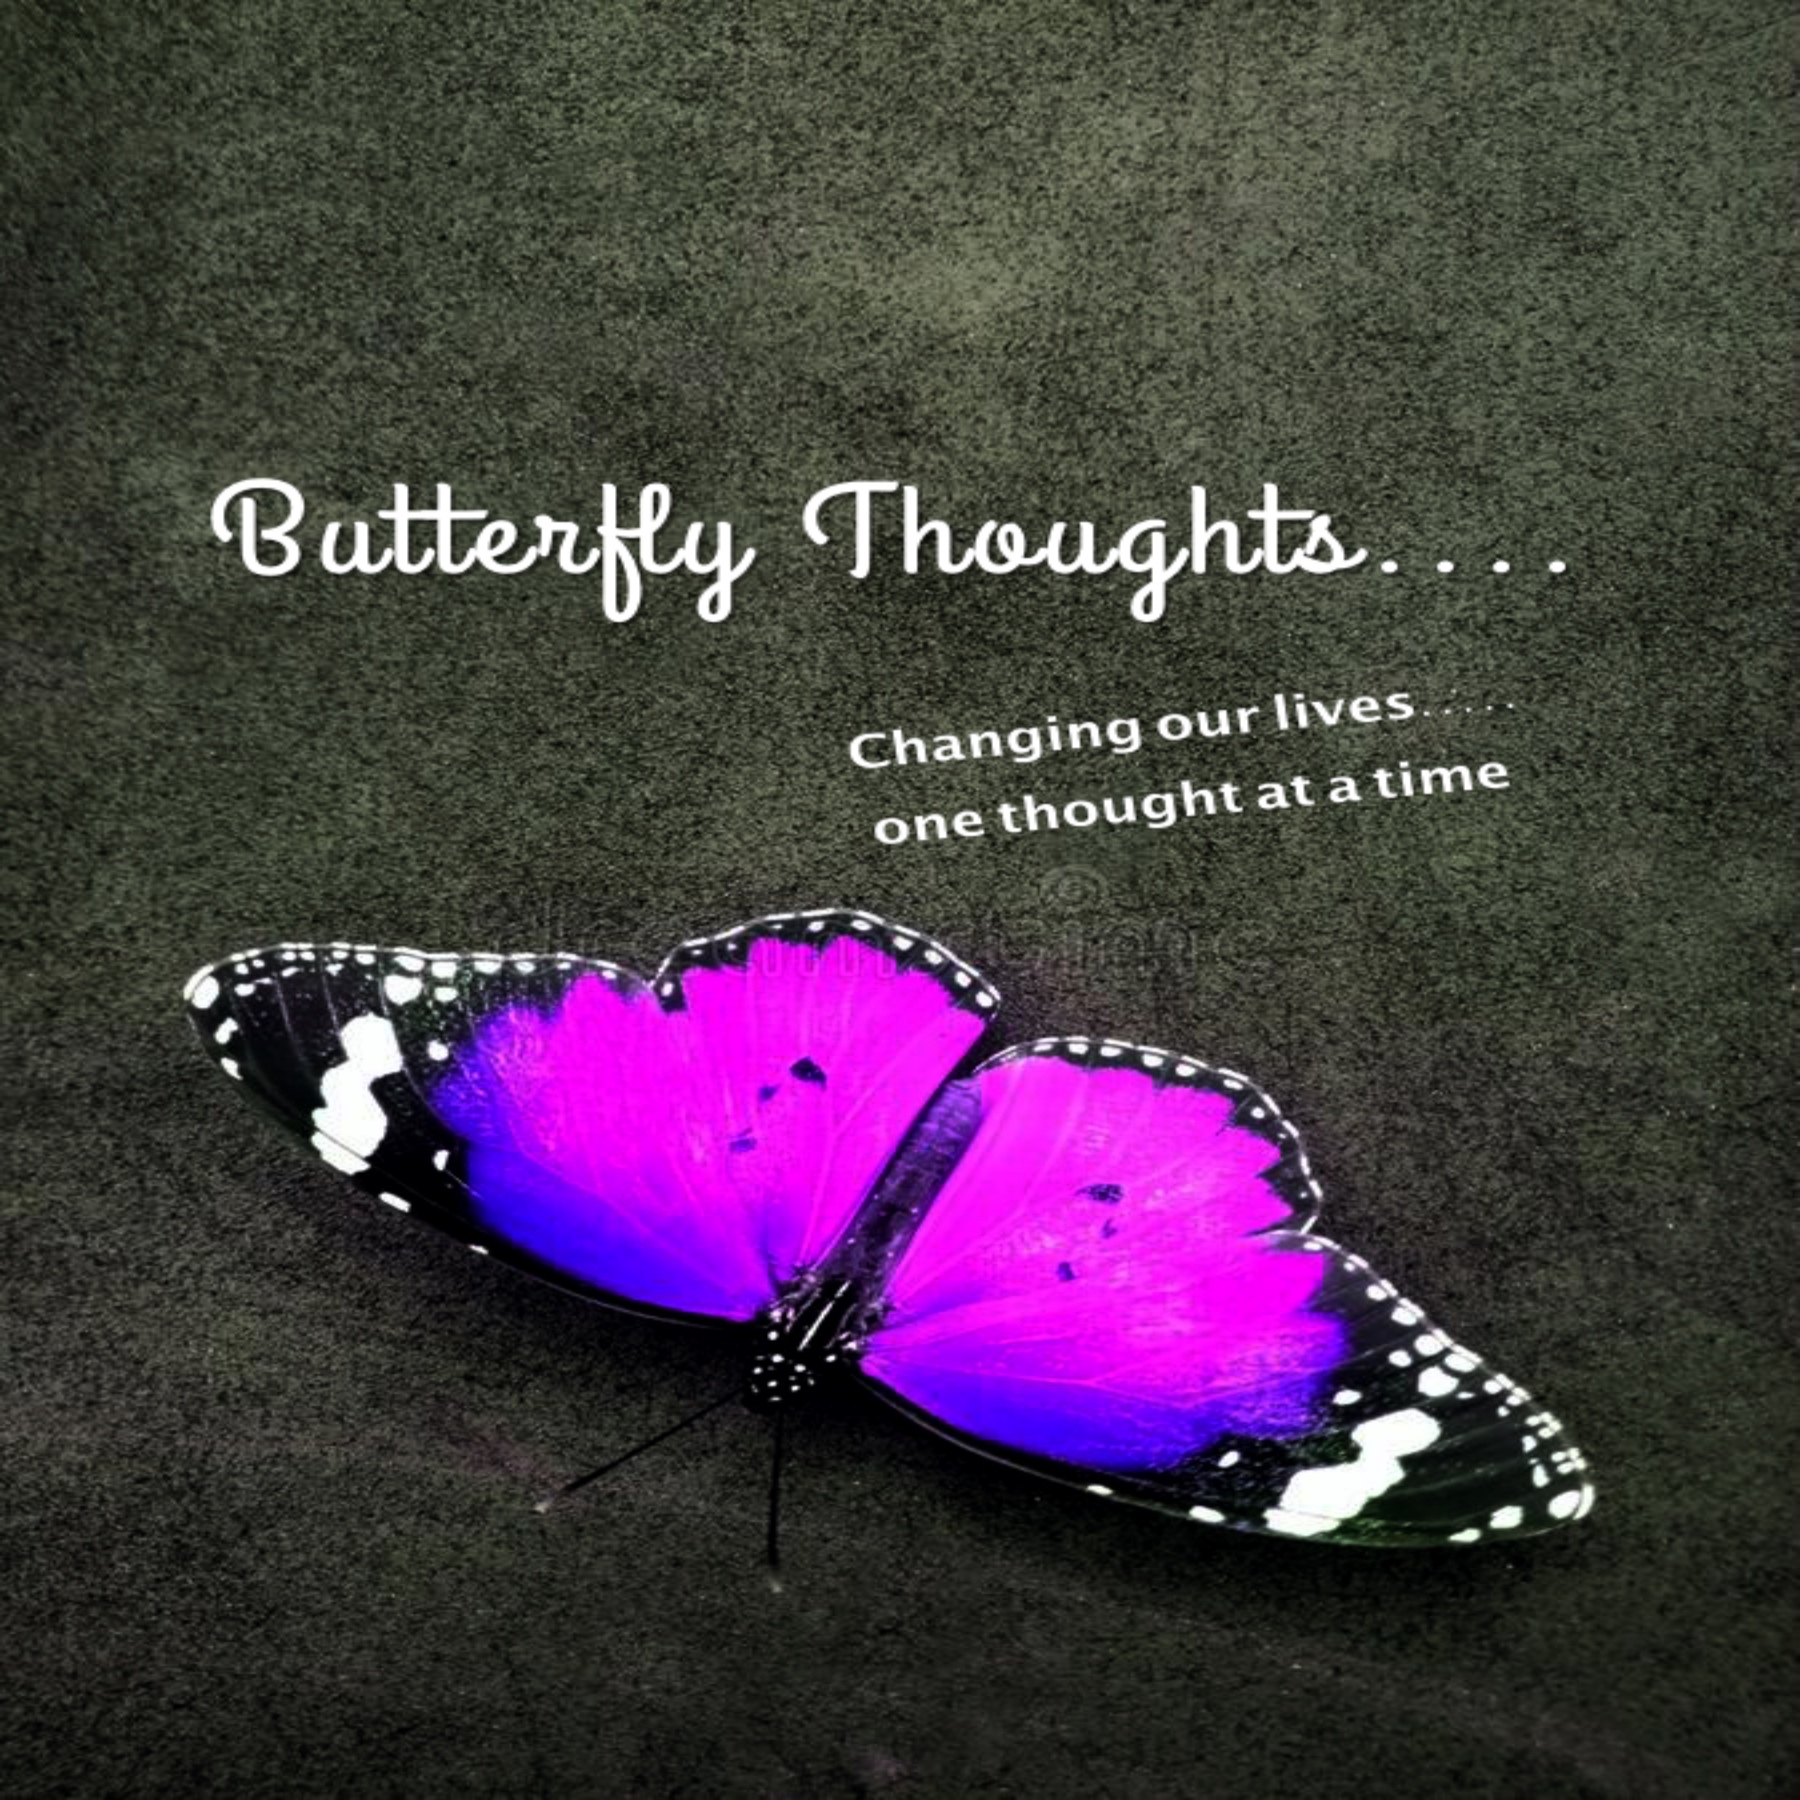 Butterfly_Thoughts.jpg